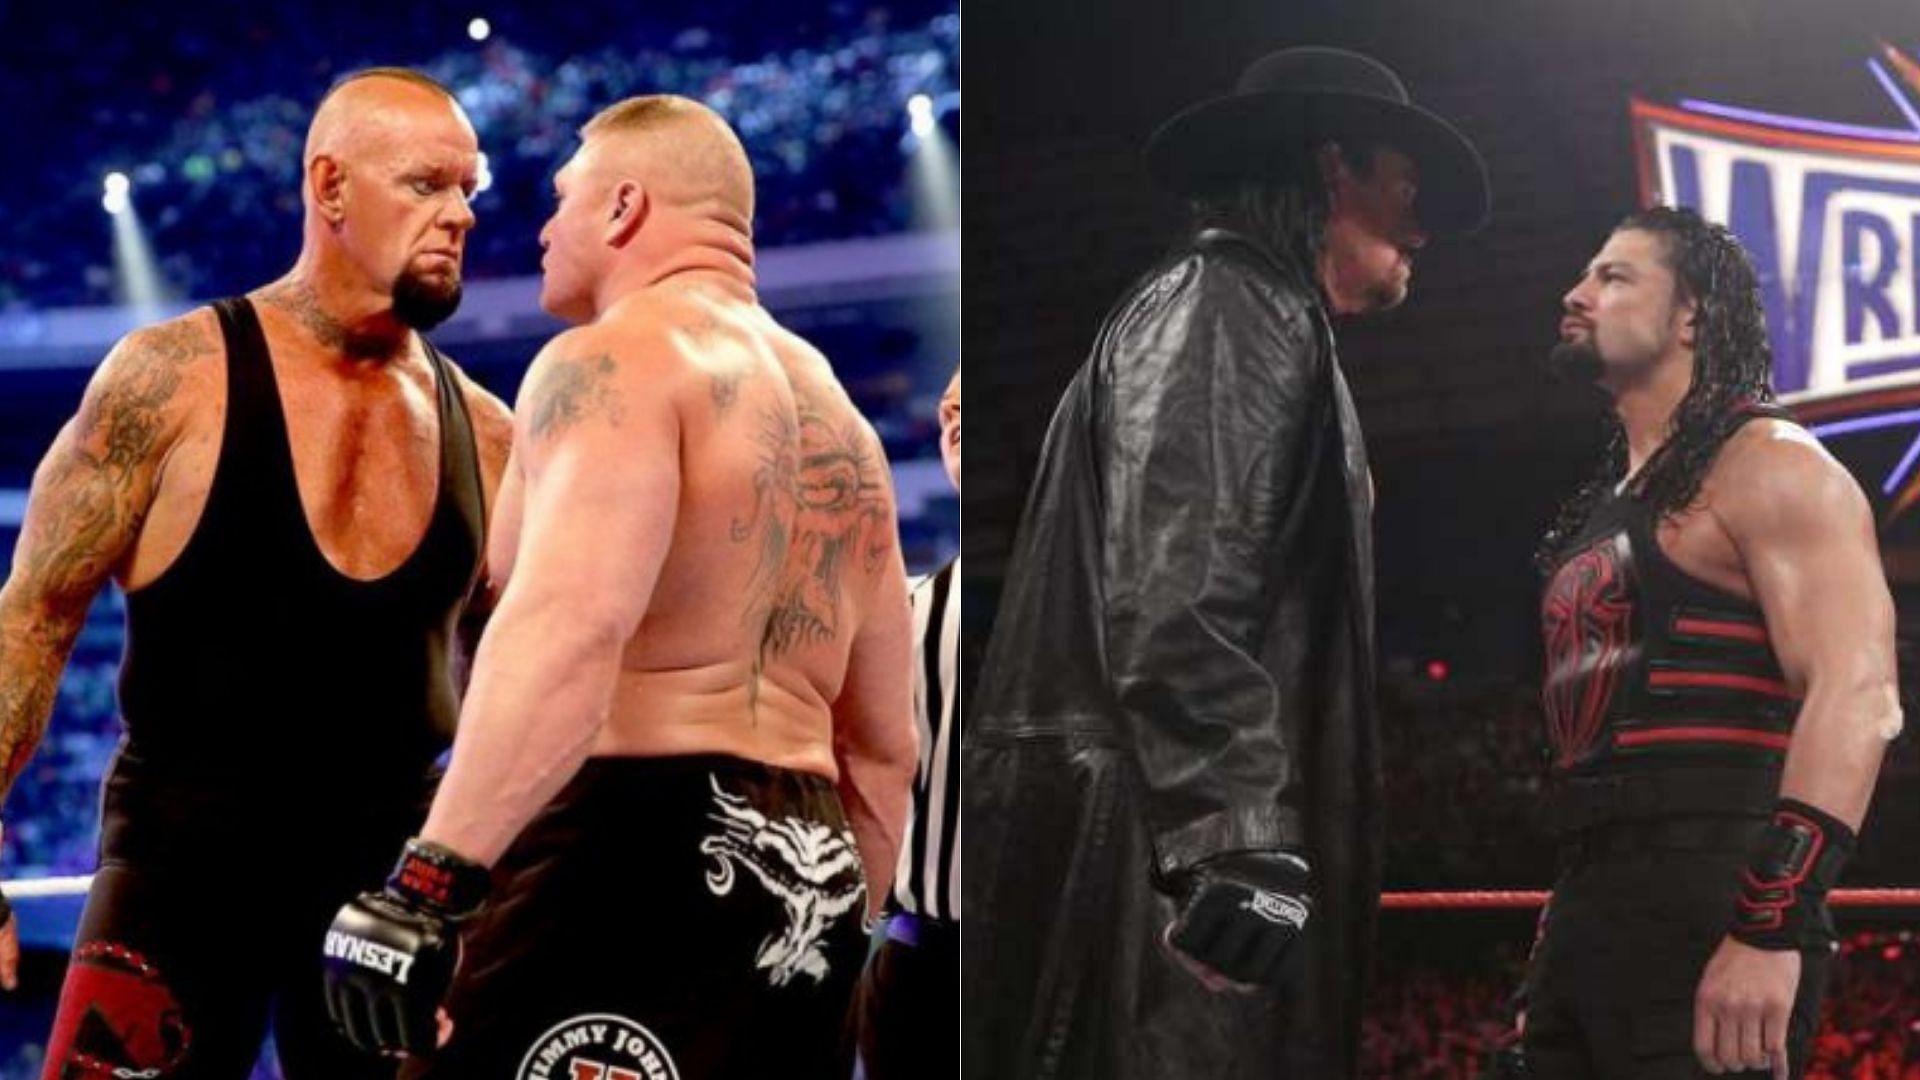 The Undertaker and Brock Lesnar (left); The Undertaker and Roman Reigns (right)